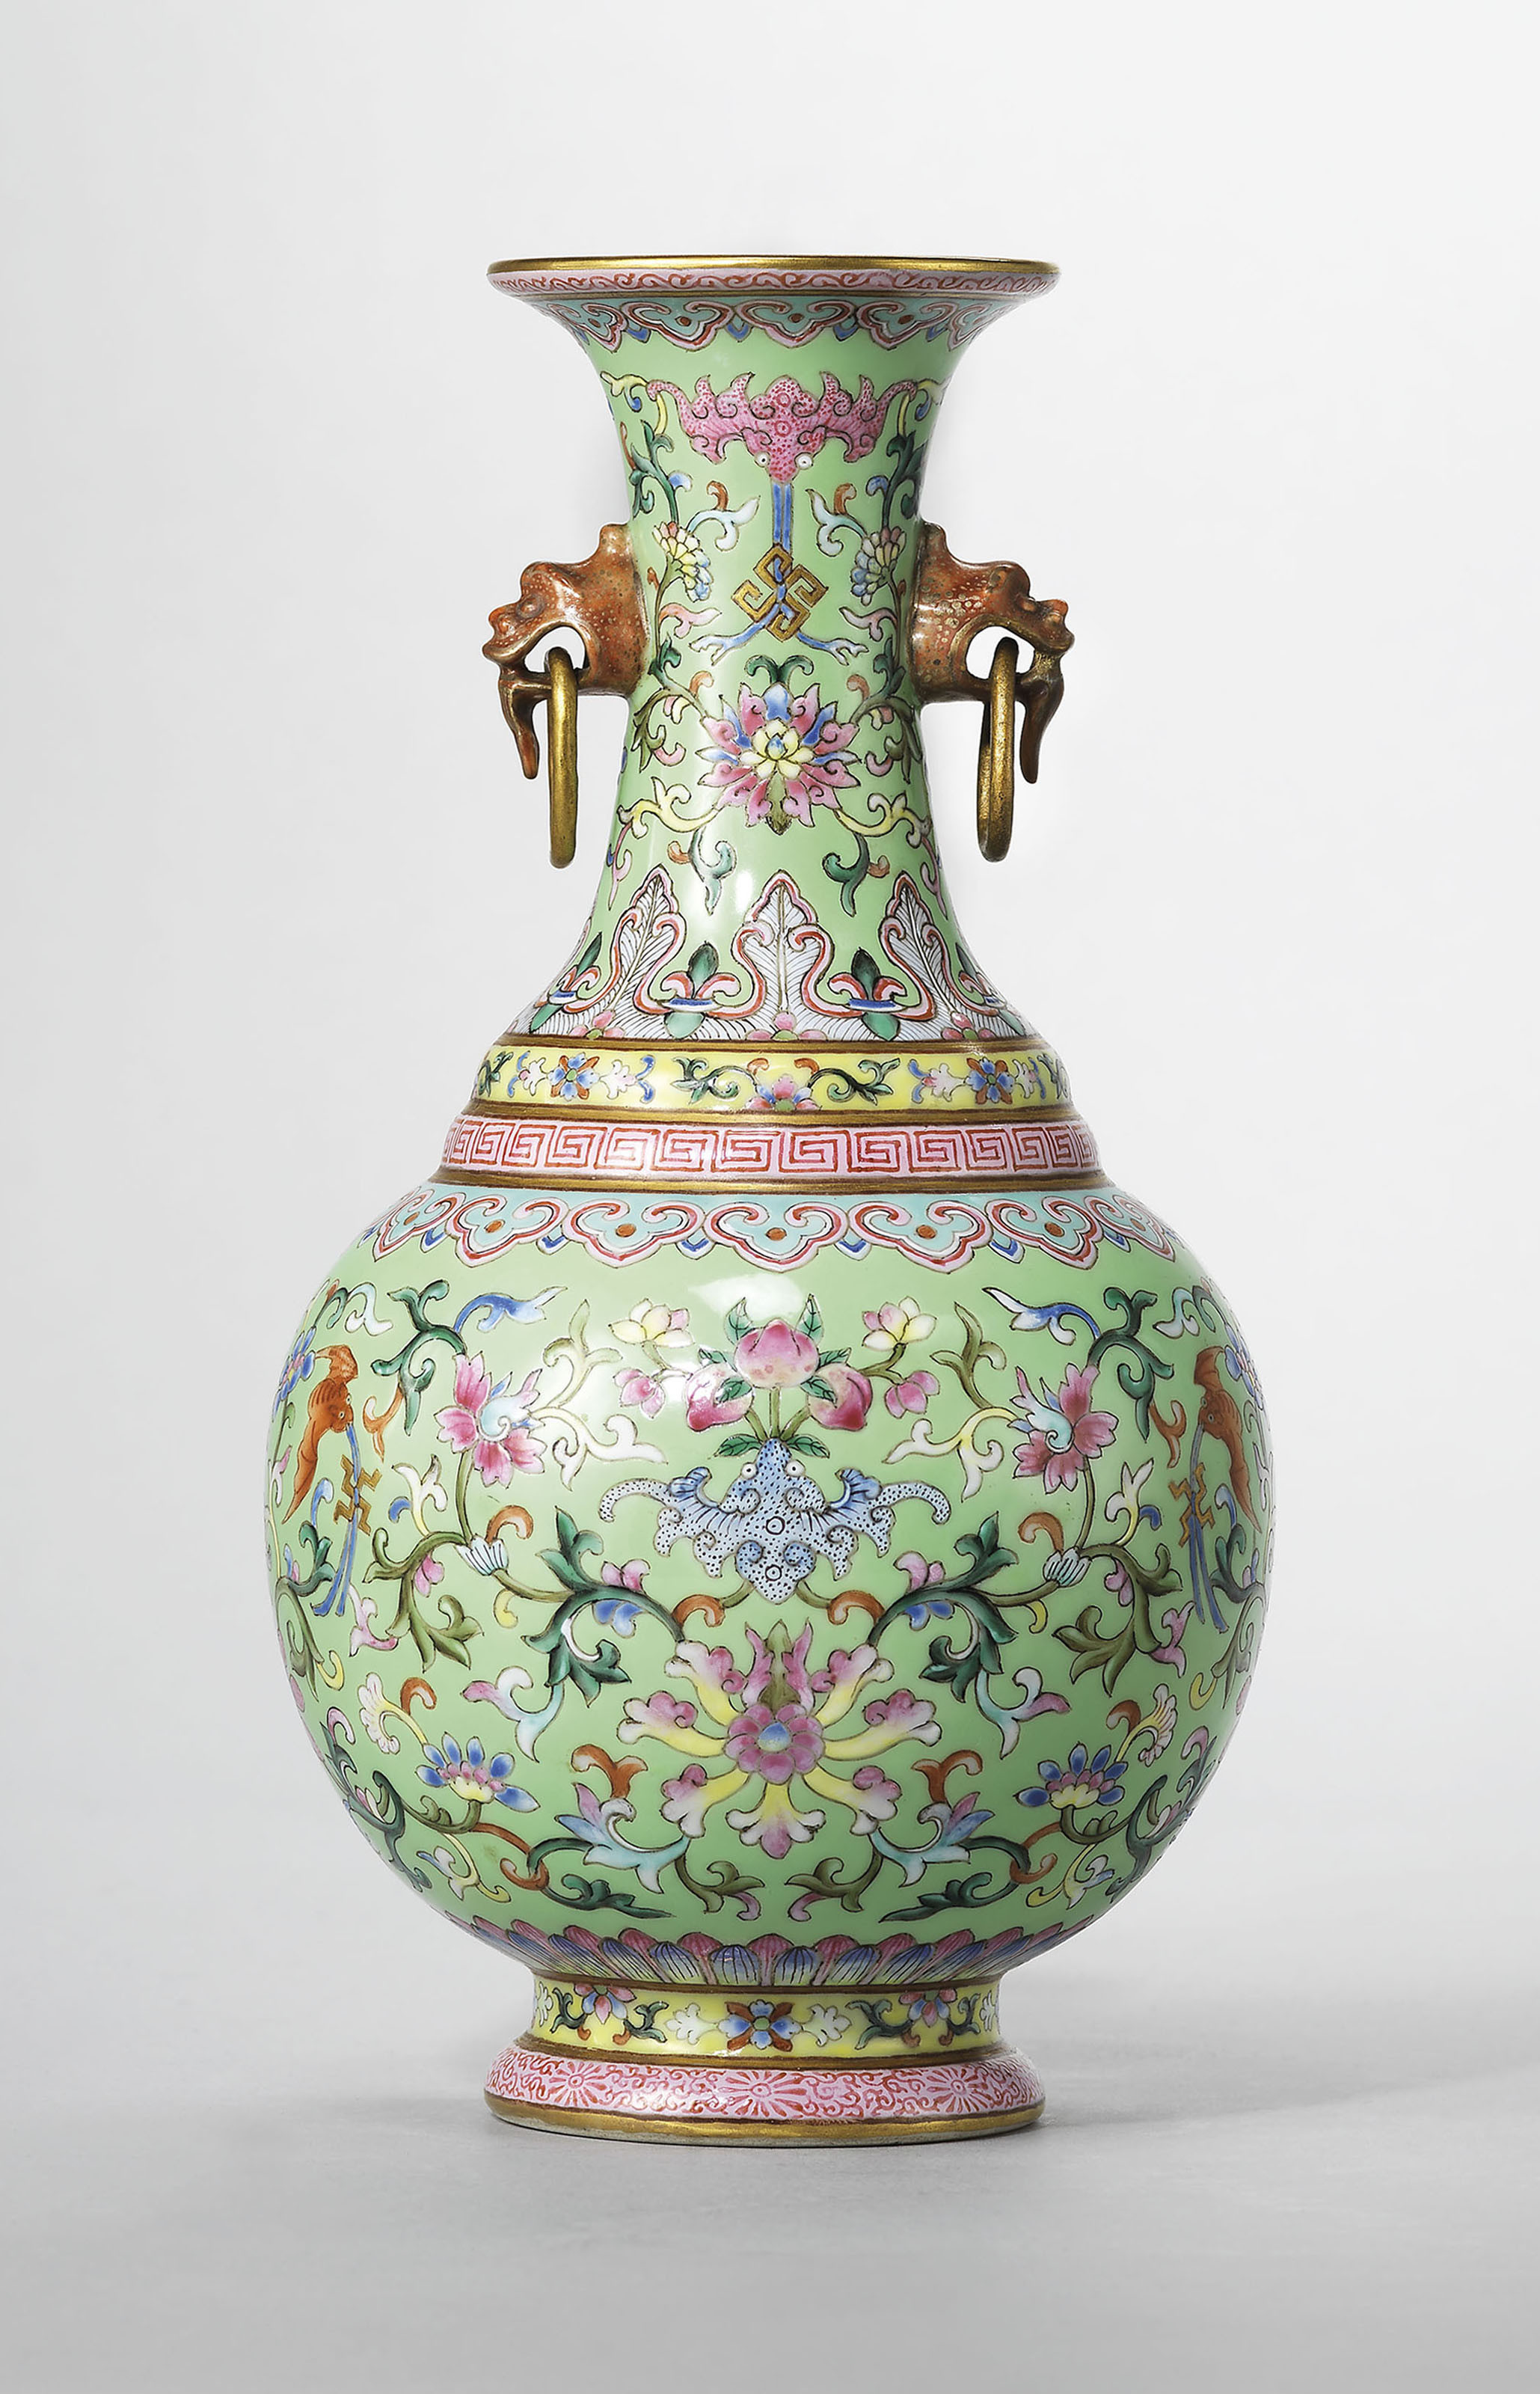 11 Perfect White Ginger Jar Vases 2022 free download white ginger jar vases of a guide to the symbolism of flowers on chinese ceramics christies regarding a lime green ground famille rose twin handled vase jiaqing six character